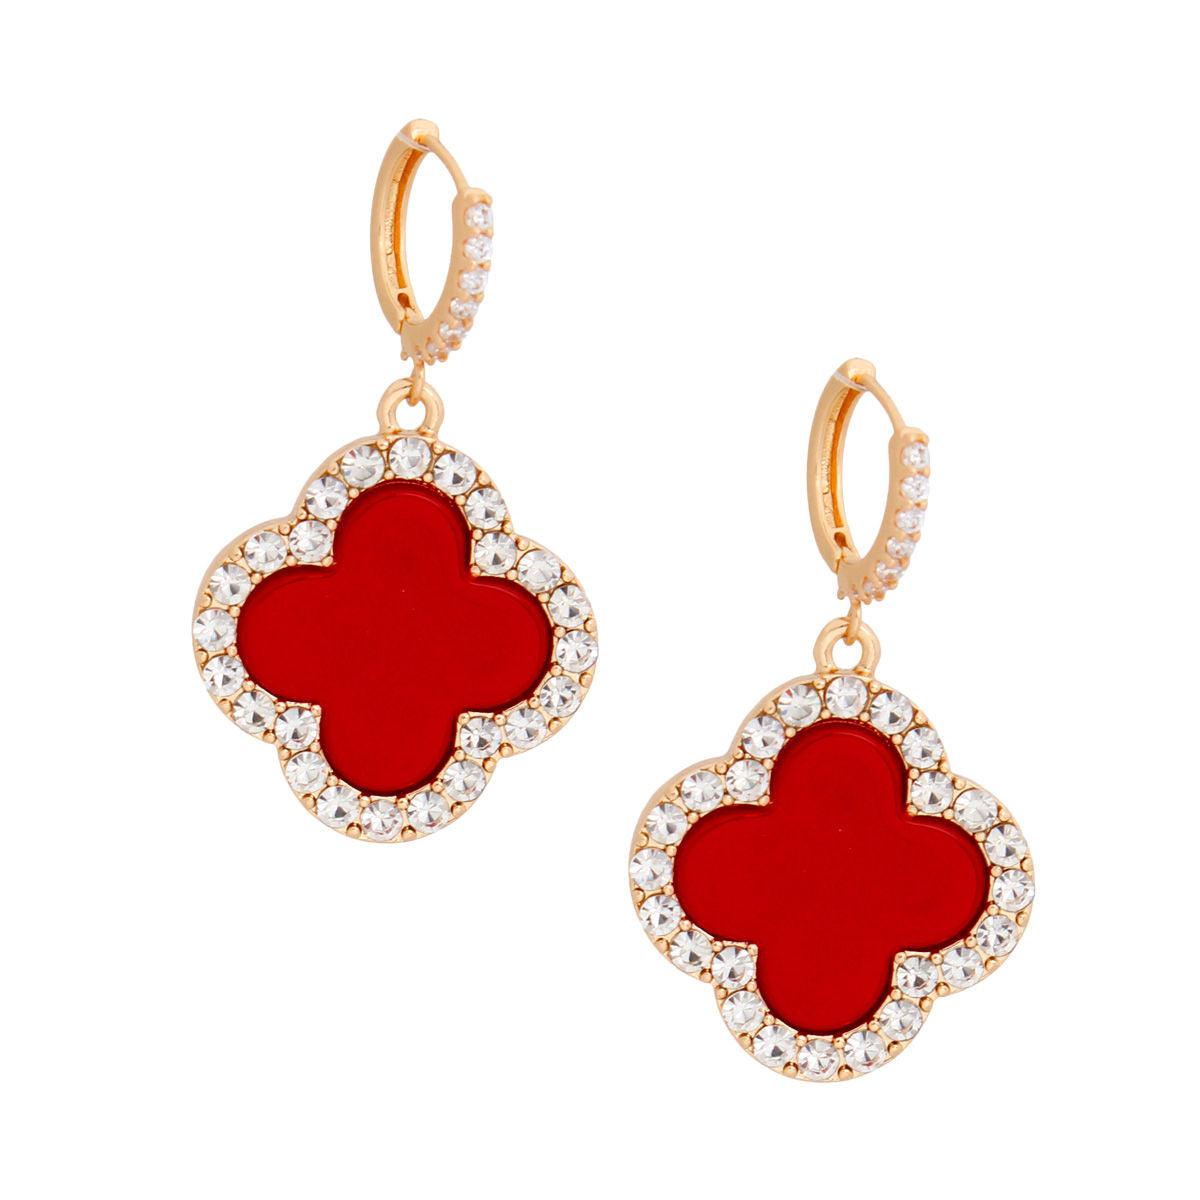 Chic & Trendy: Red Clover Dangle Drop Earrings in Gold